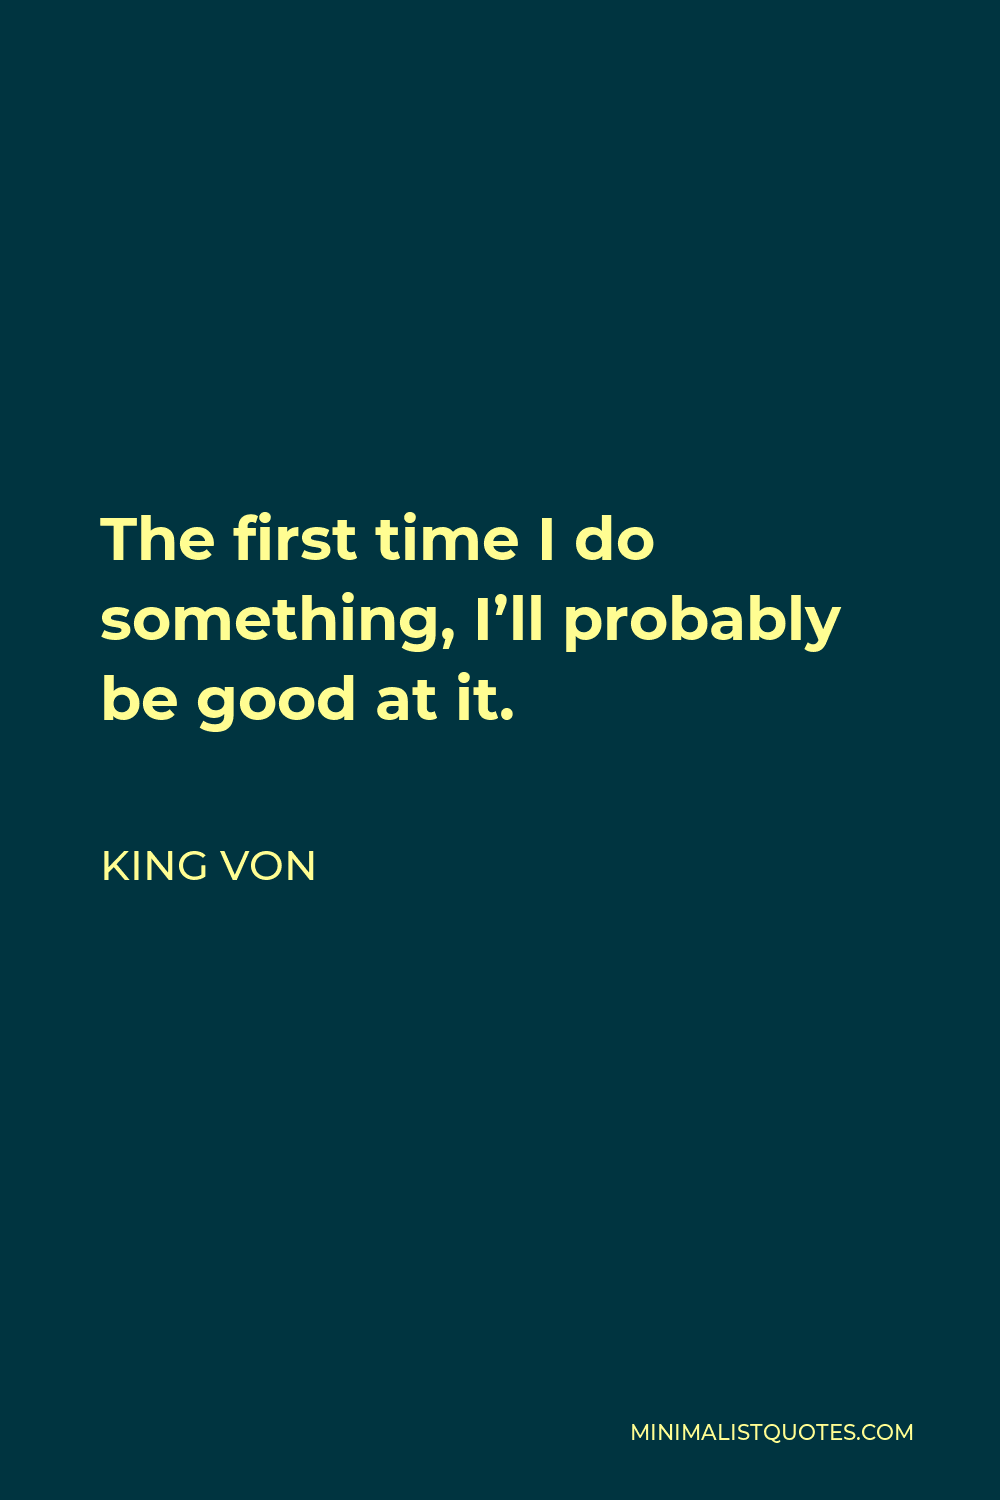 King Von Quote - The first time I do something, I’ll probably be good at it.